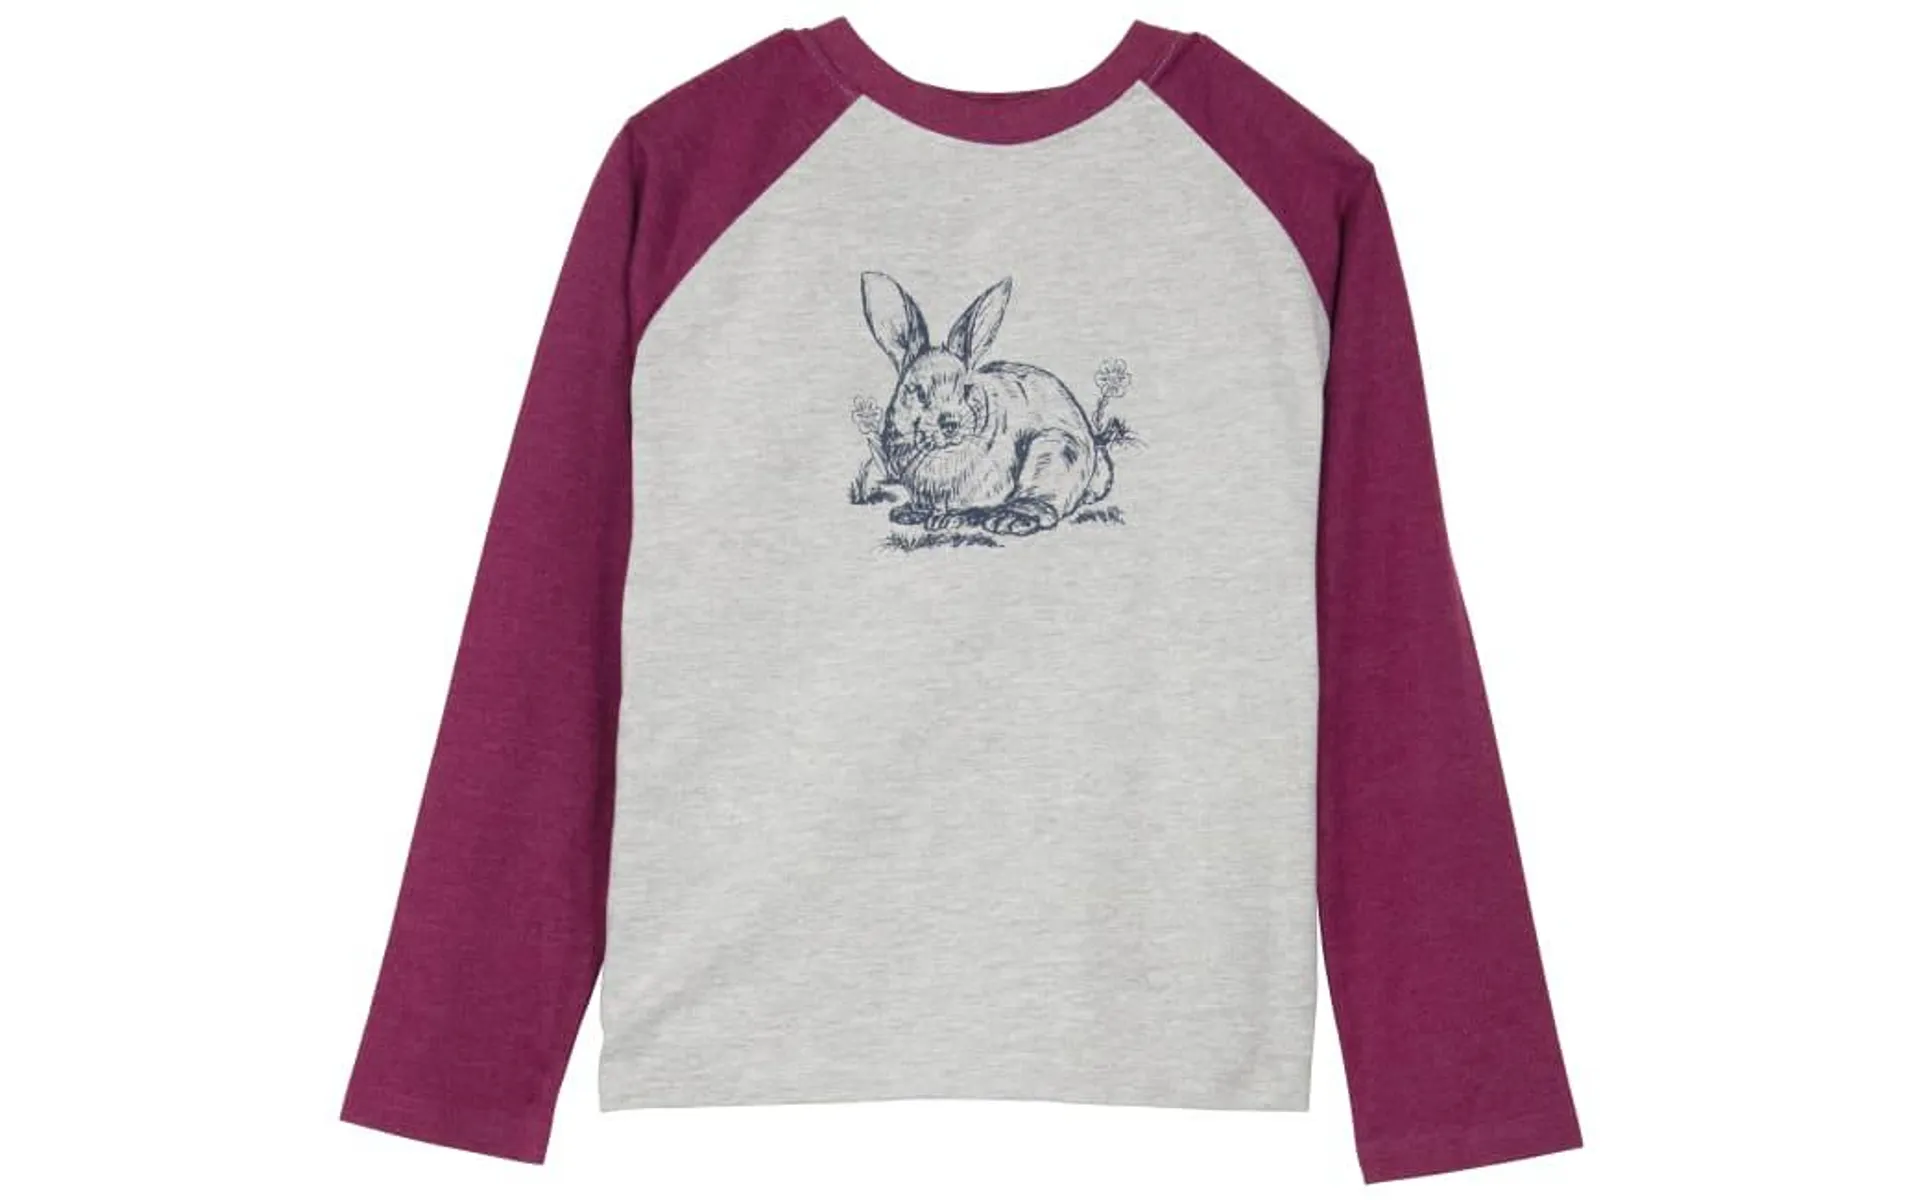 Outdoor Kids Bunny Graphic Raglan Long-Sleeve T-Shirt for Toddlers or Girls